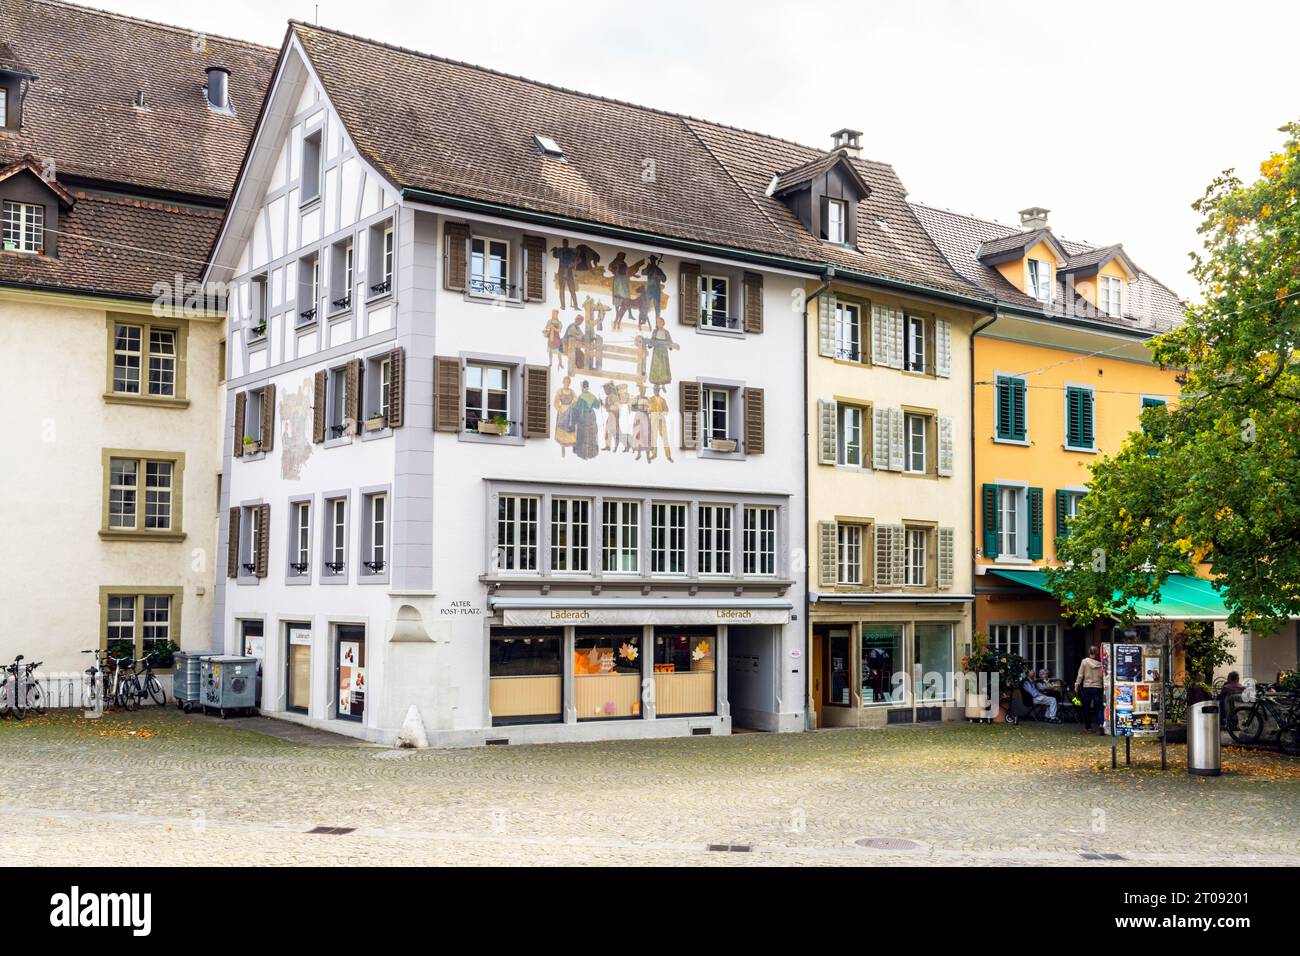 Traditional building by Old post office square (Alter Postplatz) in Zofingen old town, canton of Aargau, Switzerland. The town was founded in 1201 by Stock Photo